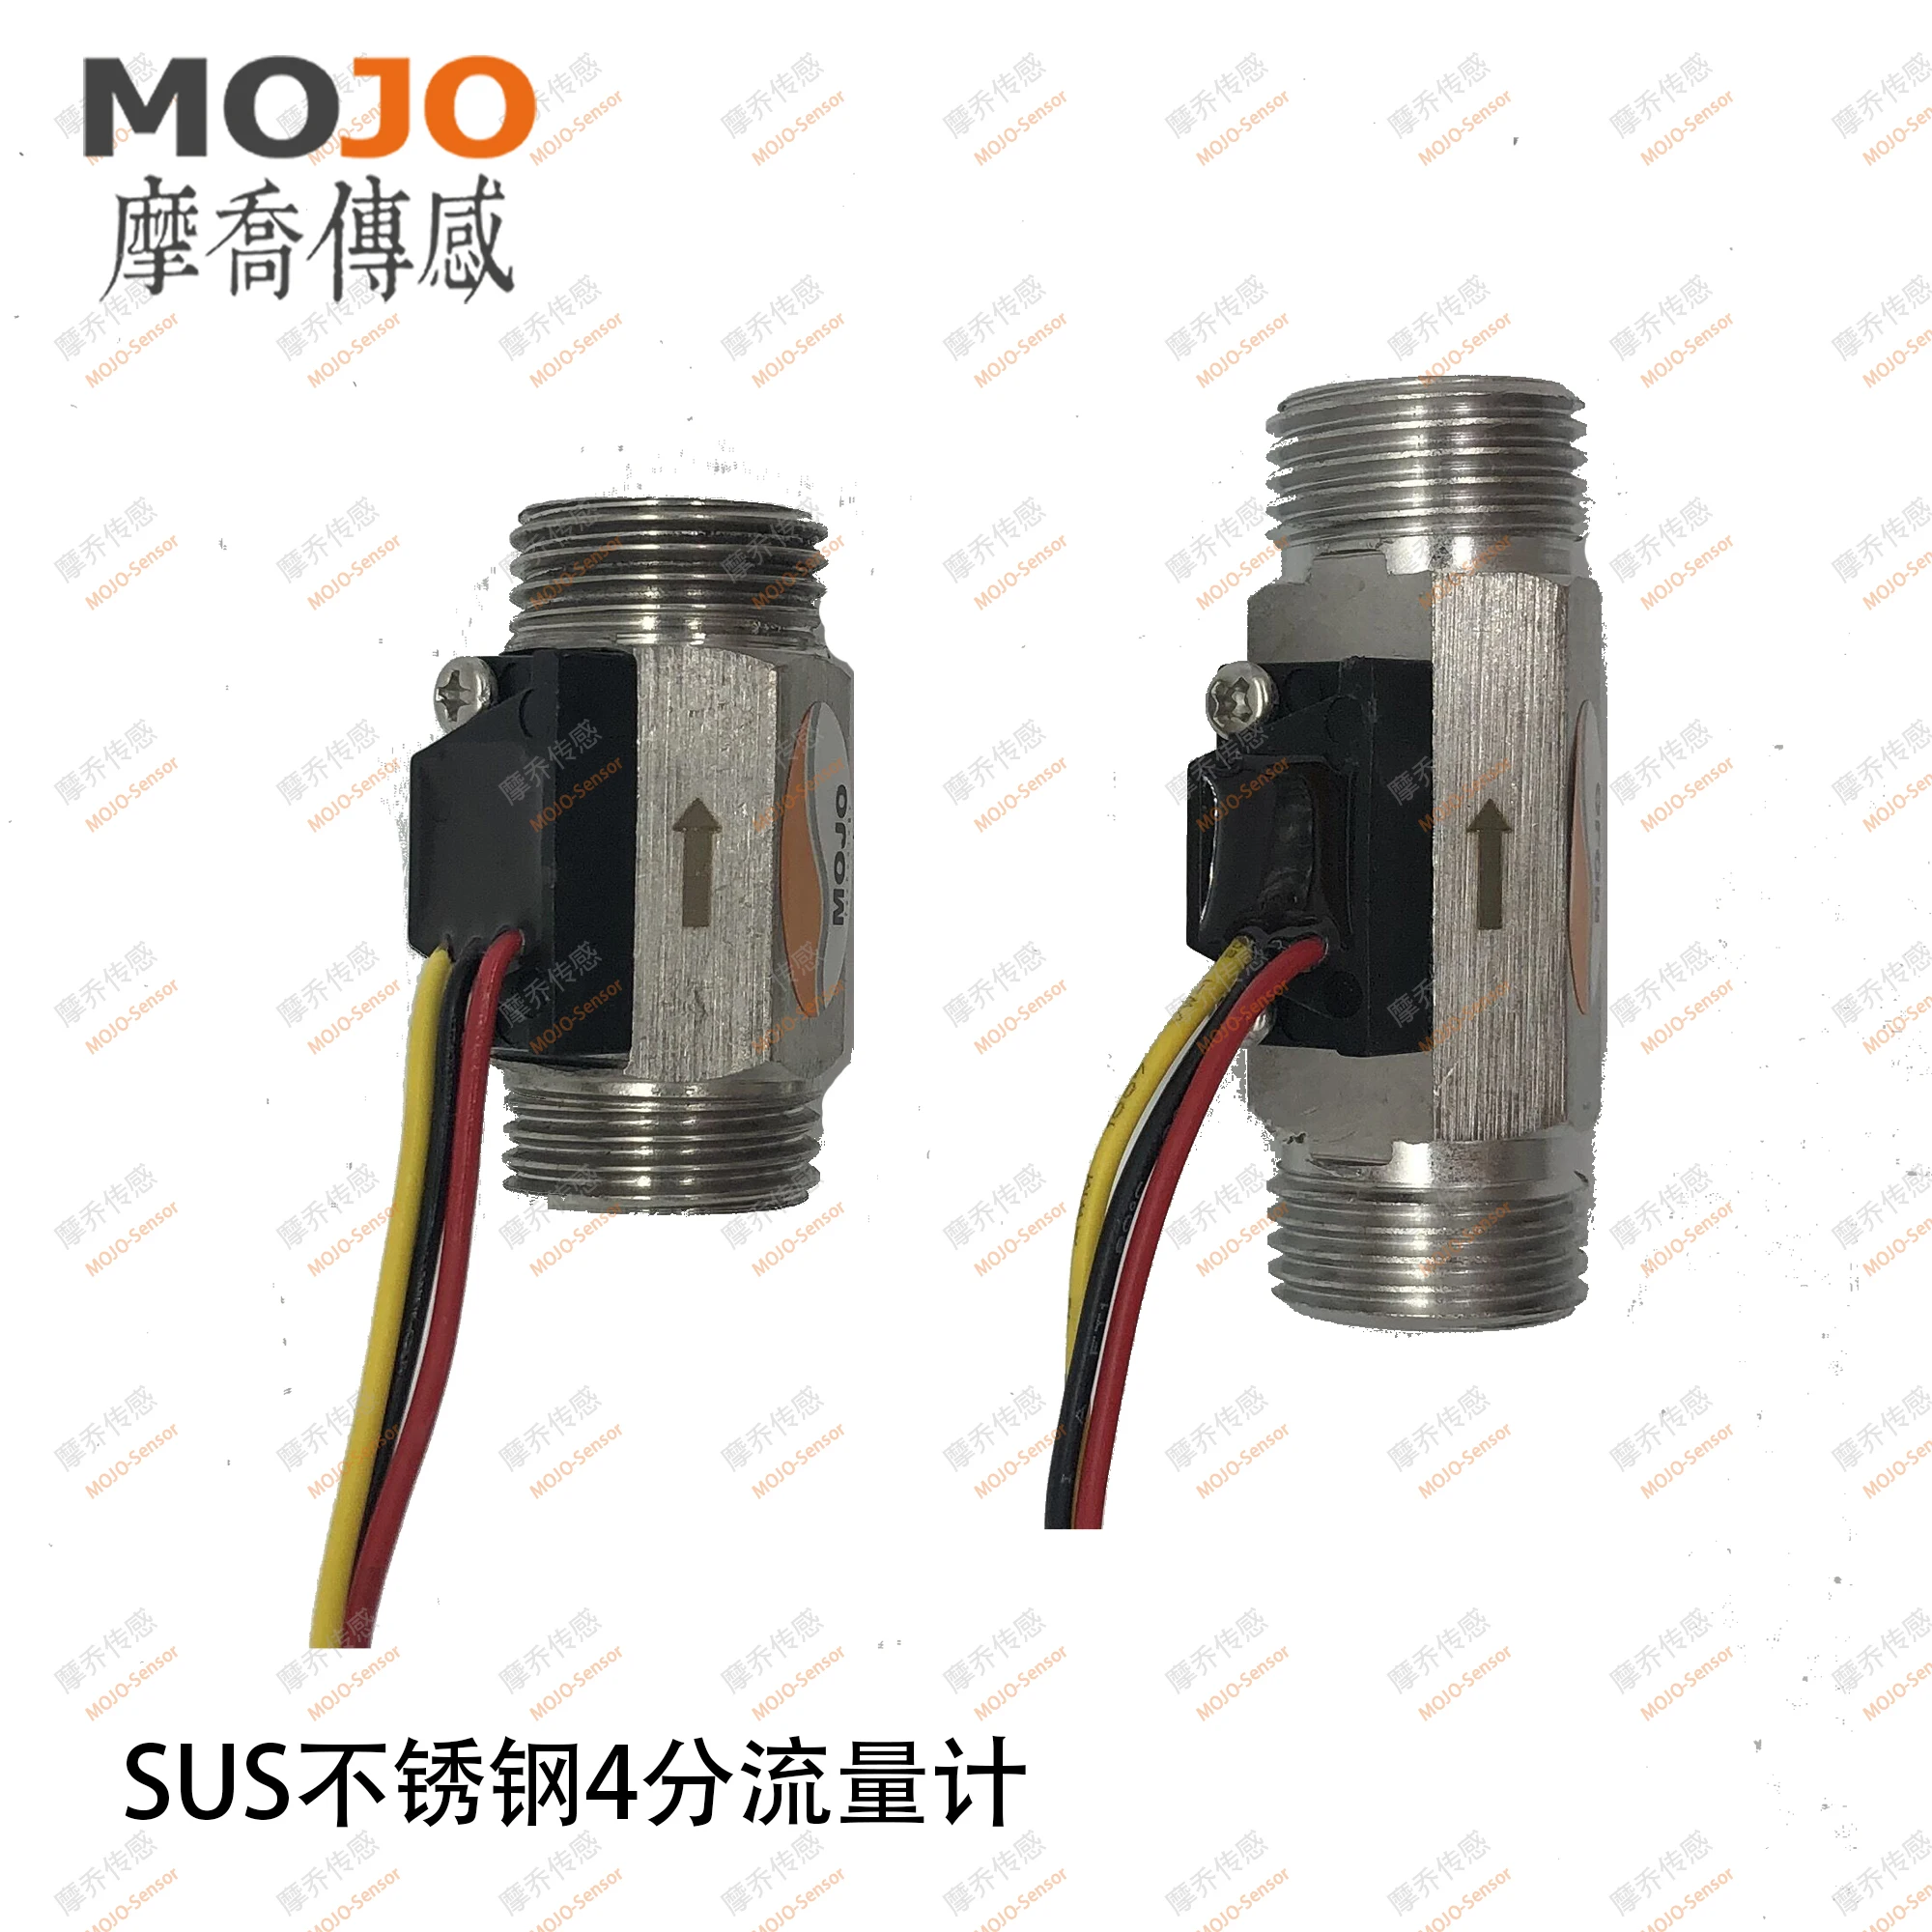 

Hz21wi-sus stainless steel flowmeter 4-point hall flow sensor high temperature resistant output pulse signal